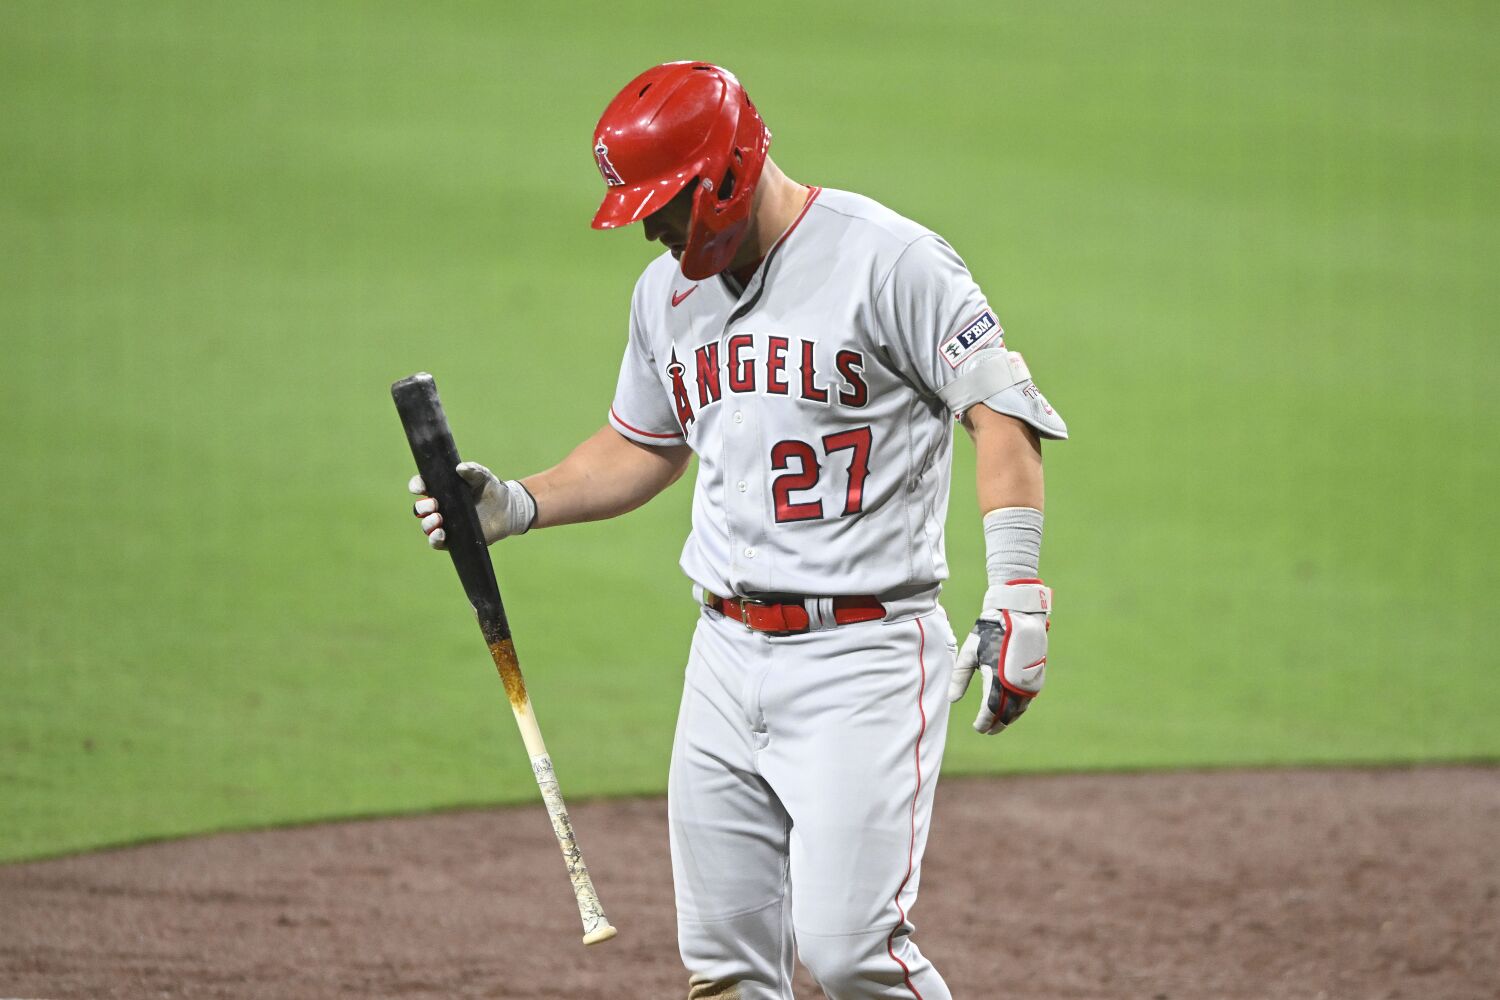 Angels try to stay positive after Mike Trout goes to IL and Shohei Ohtani is hurt